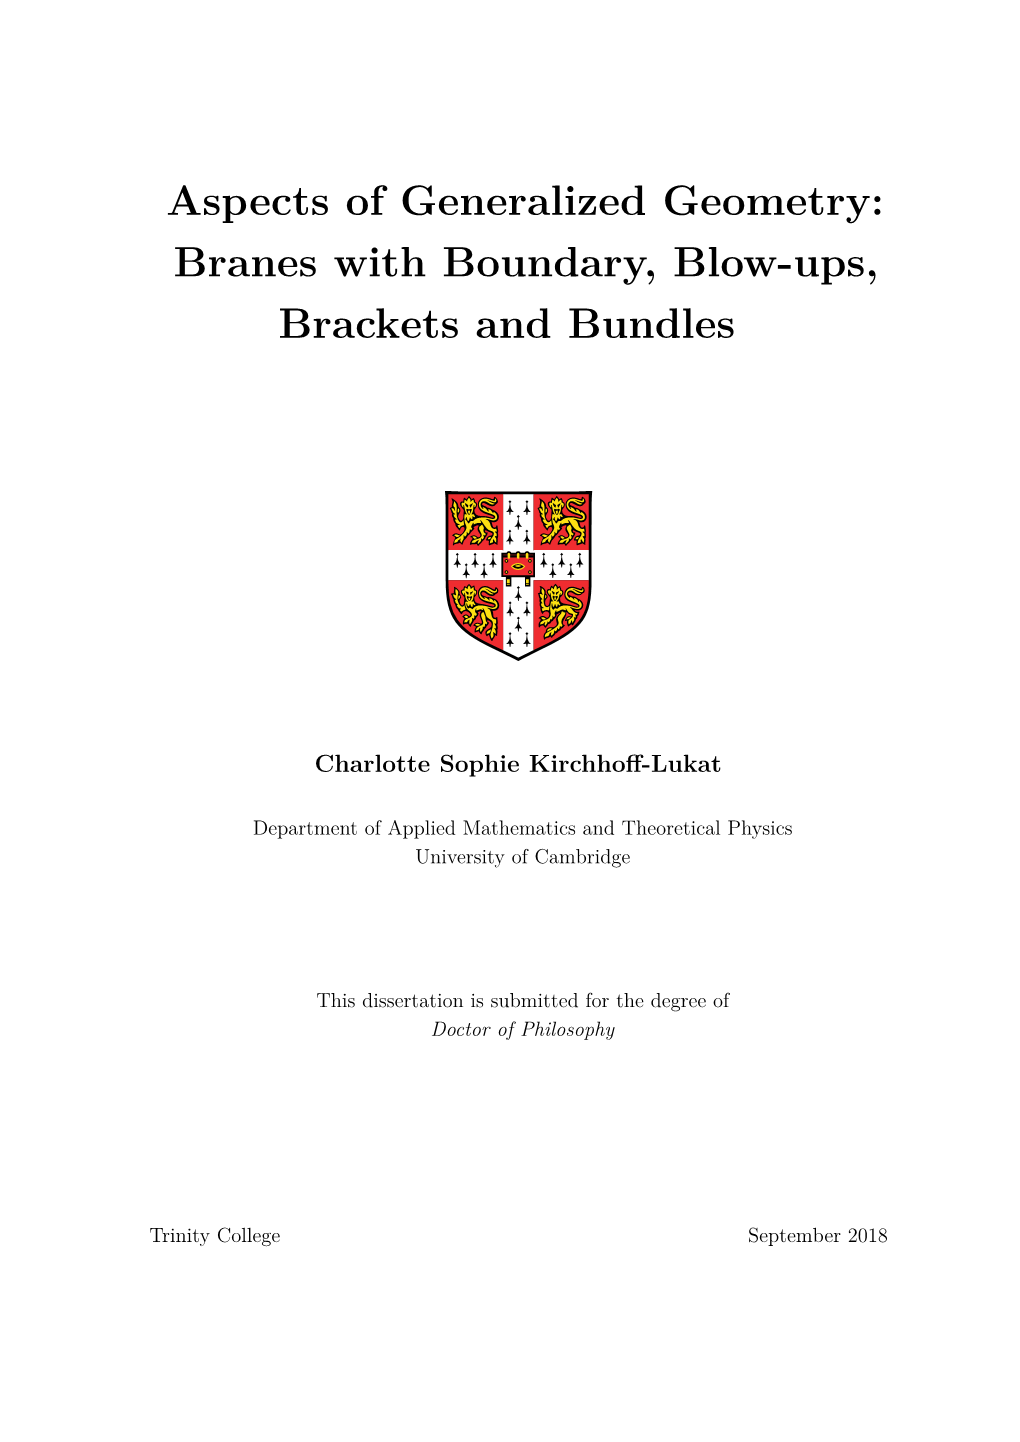 Aspects of Generalized Geometry: Branes with Boundary, Blow-Ups, Brackets and Bundles